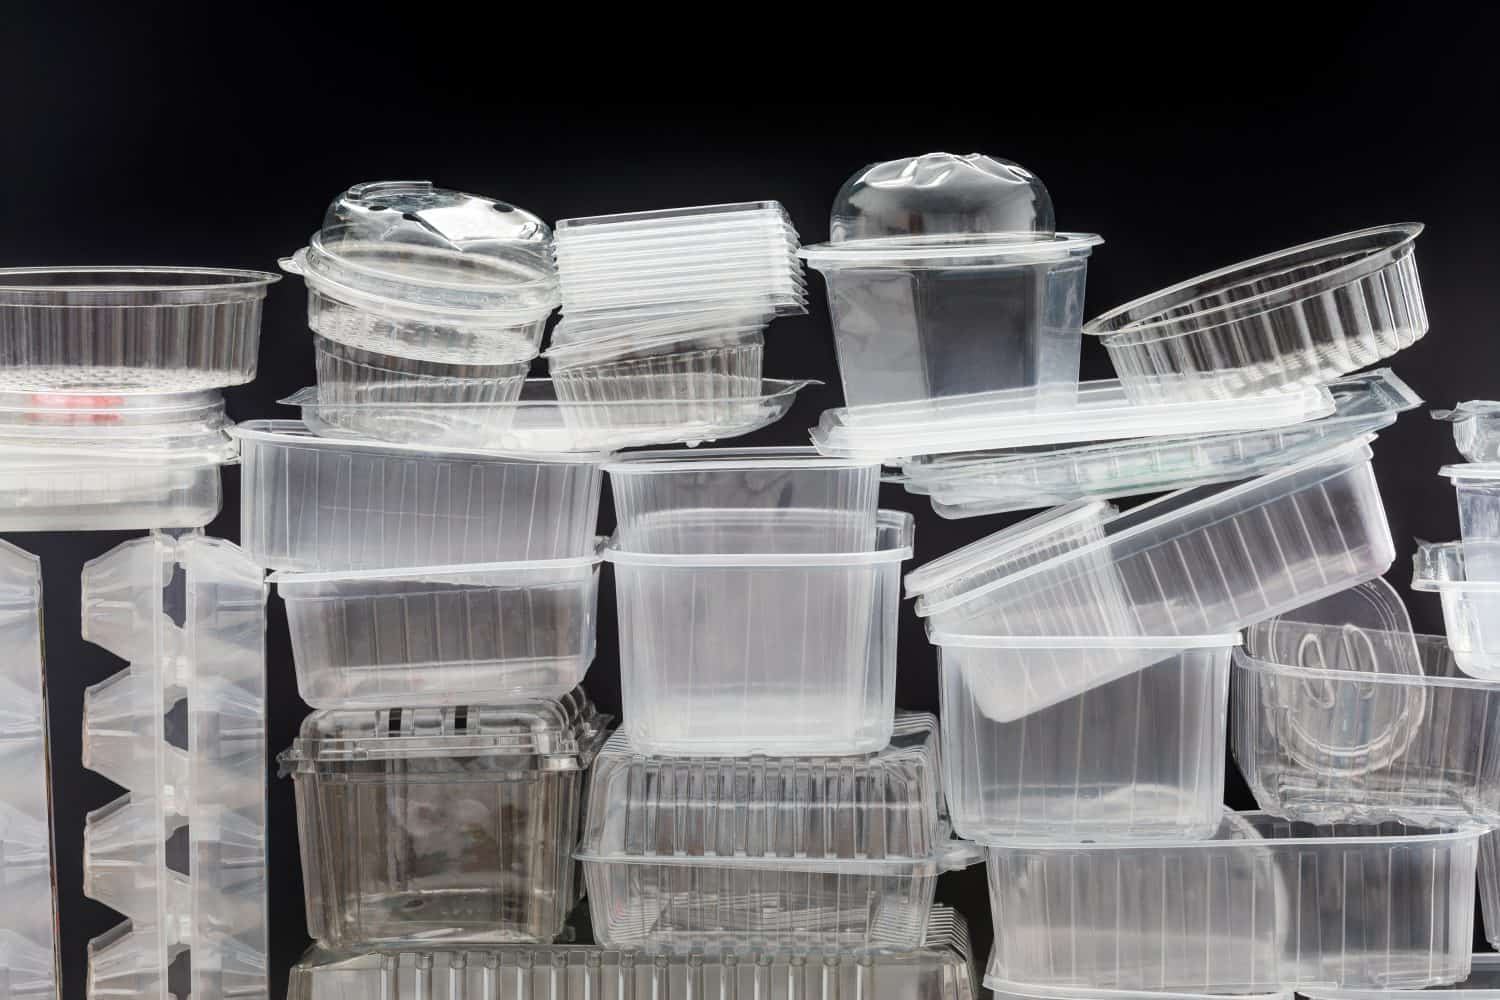 Many clean plastic boxes for food packaging. Pile of disposable plastic containers for take away food.